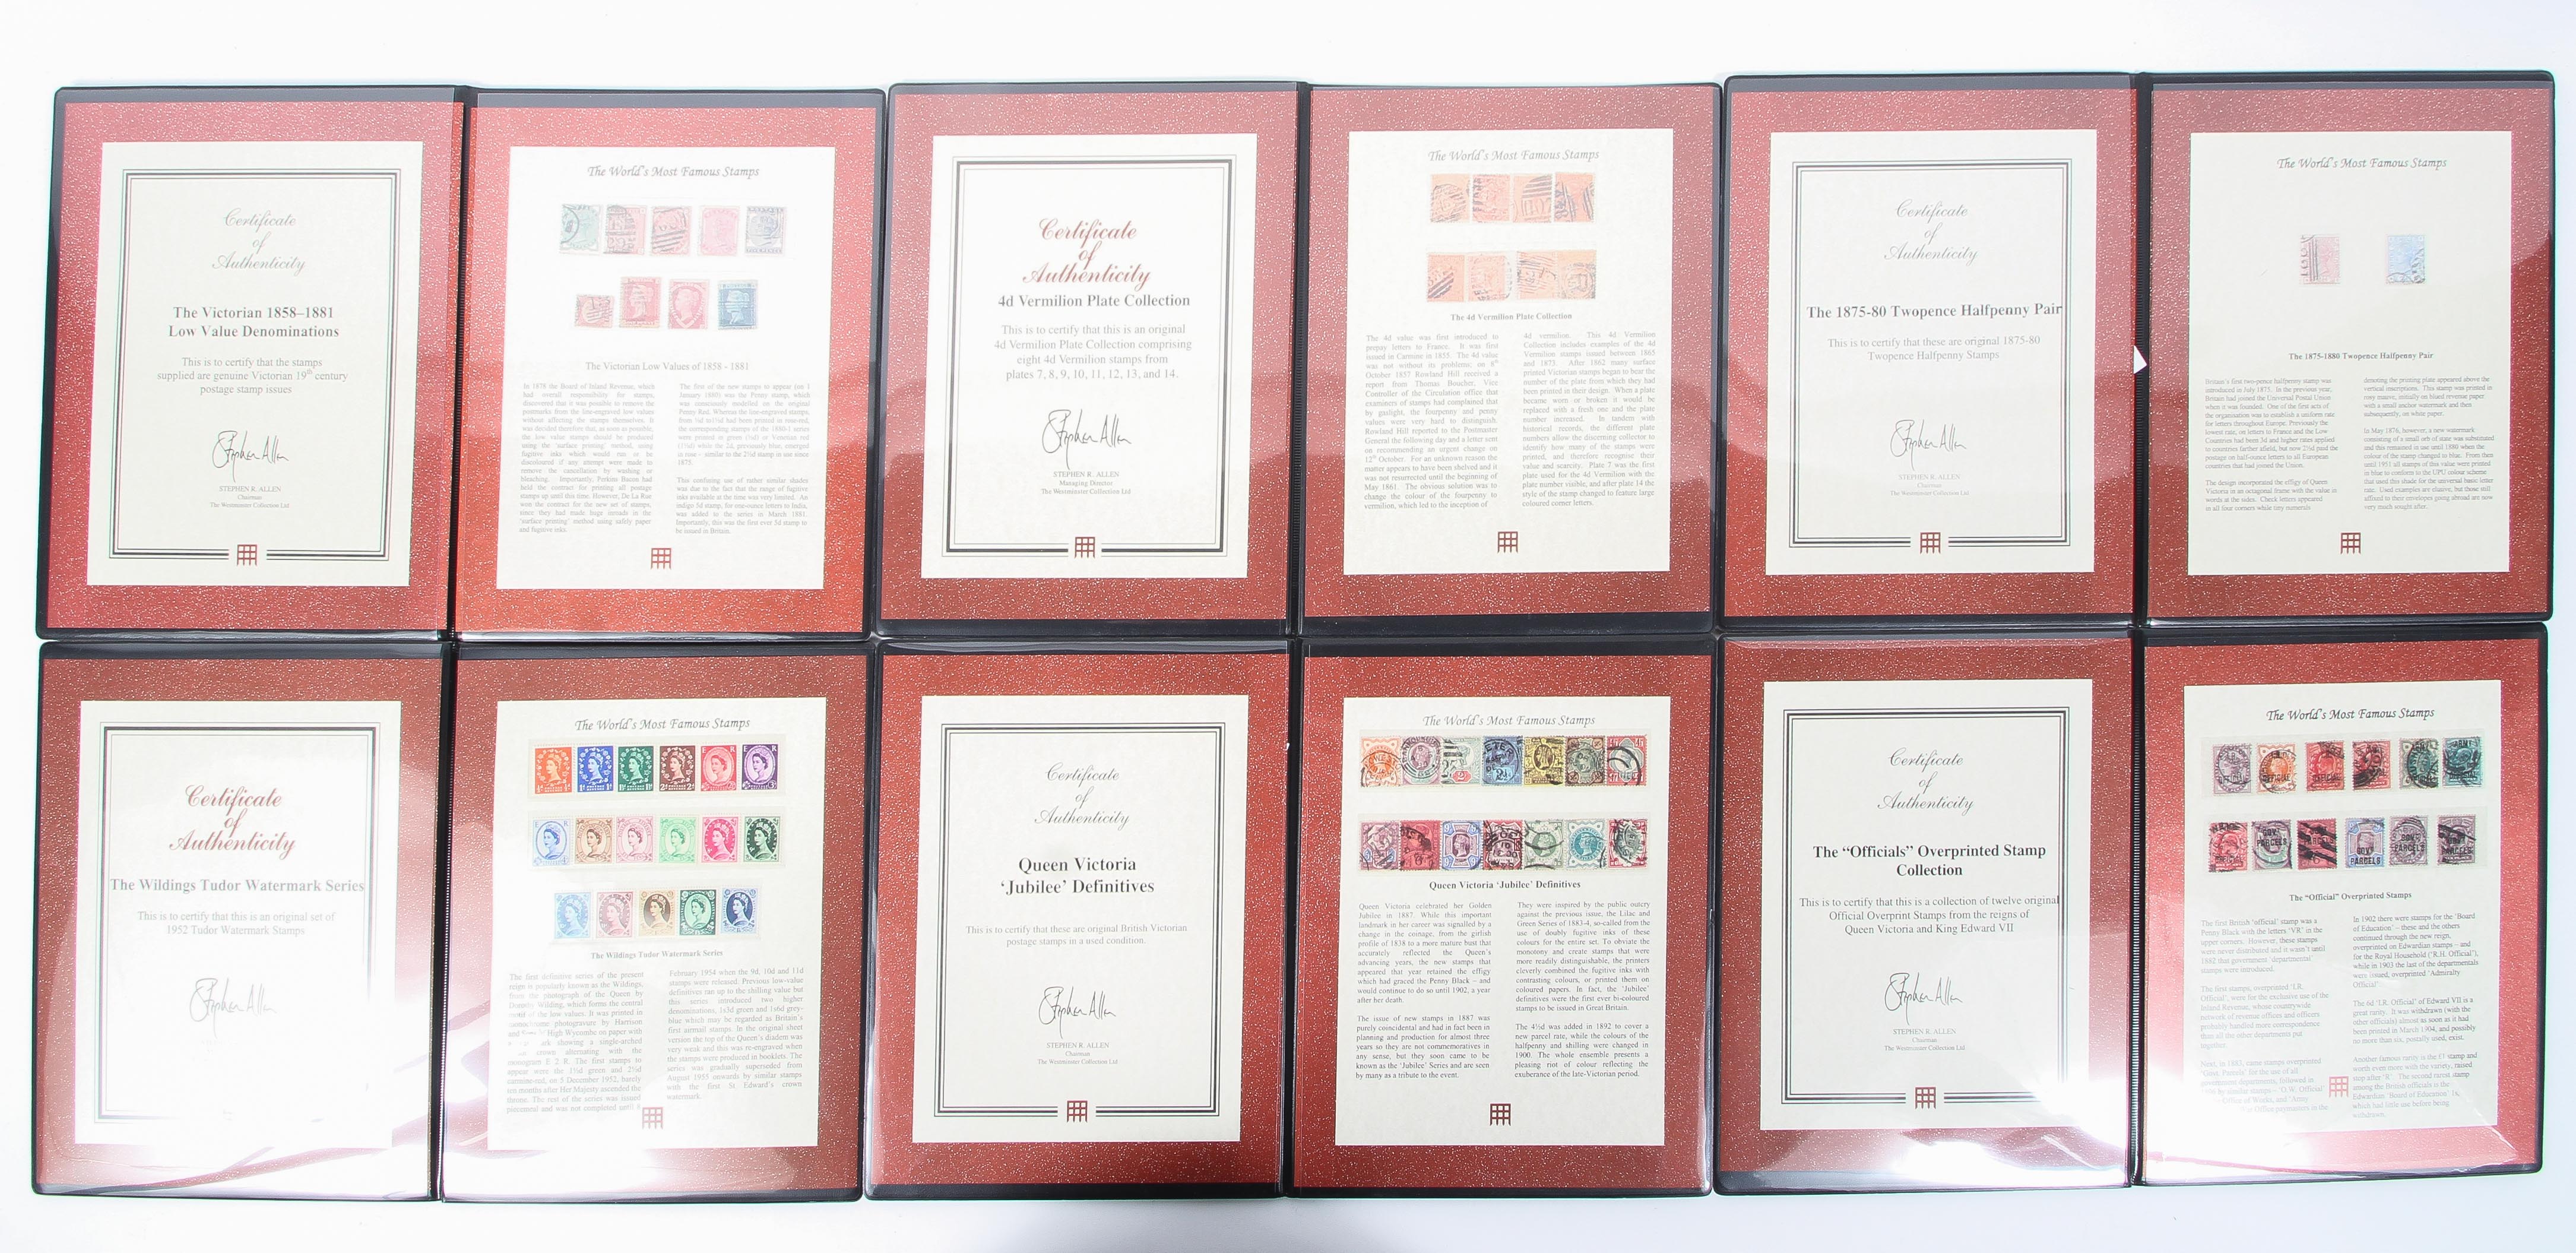 Six folders from the Westminster Collection Ltd of world famous stamps